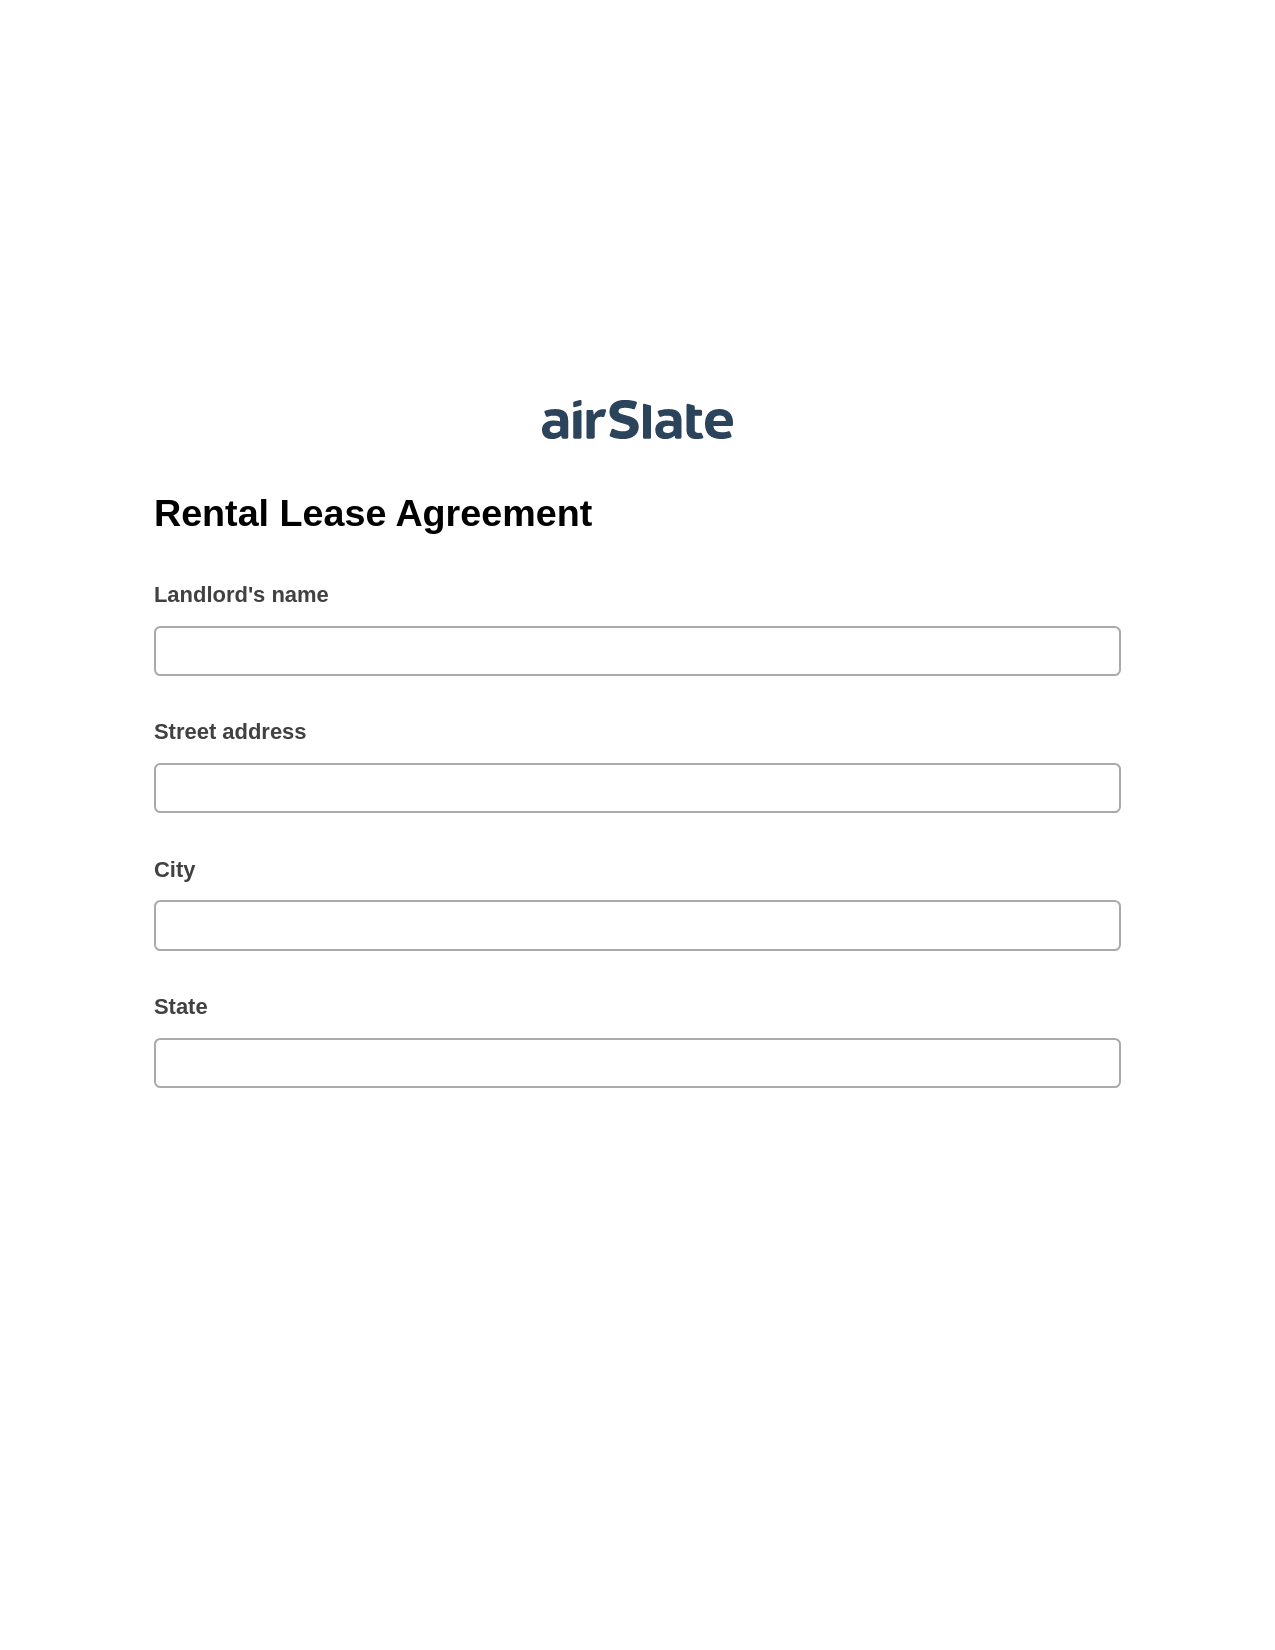 Rental Lease Agreement Pre-fill from MySQL Dropdown Options Bot, System Bot - Create a Slate in another Flow, Google Drive Bot